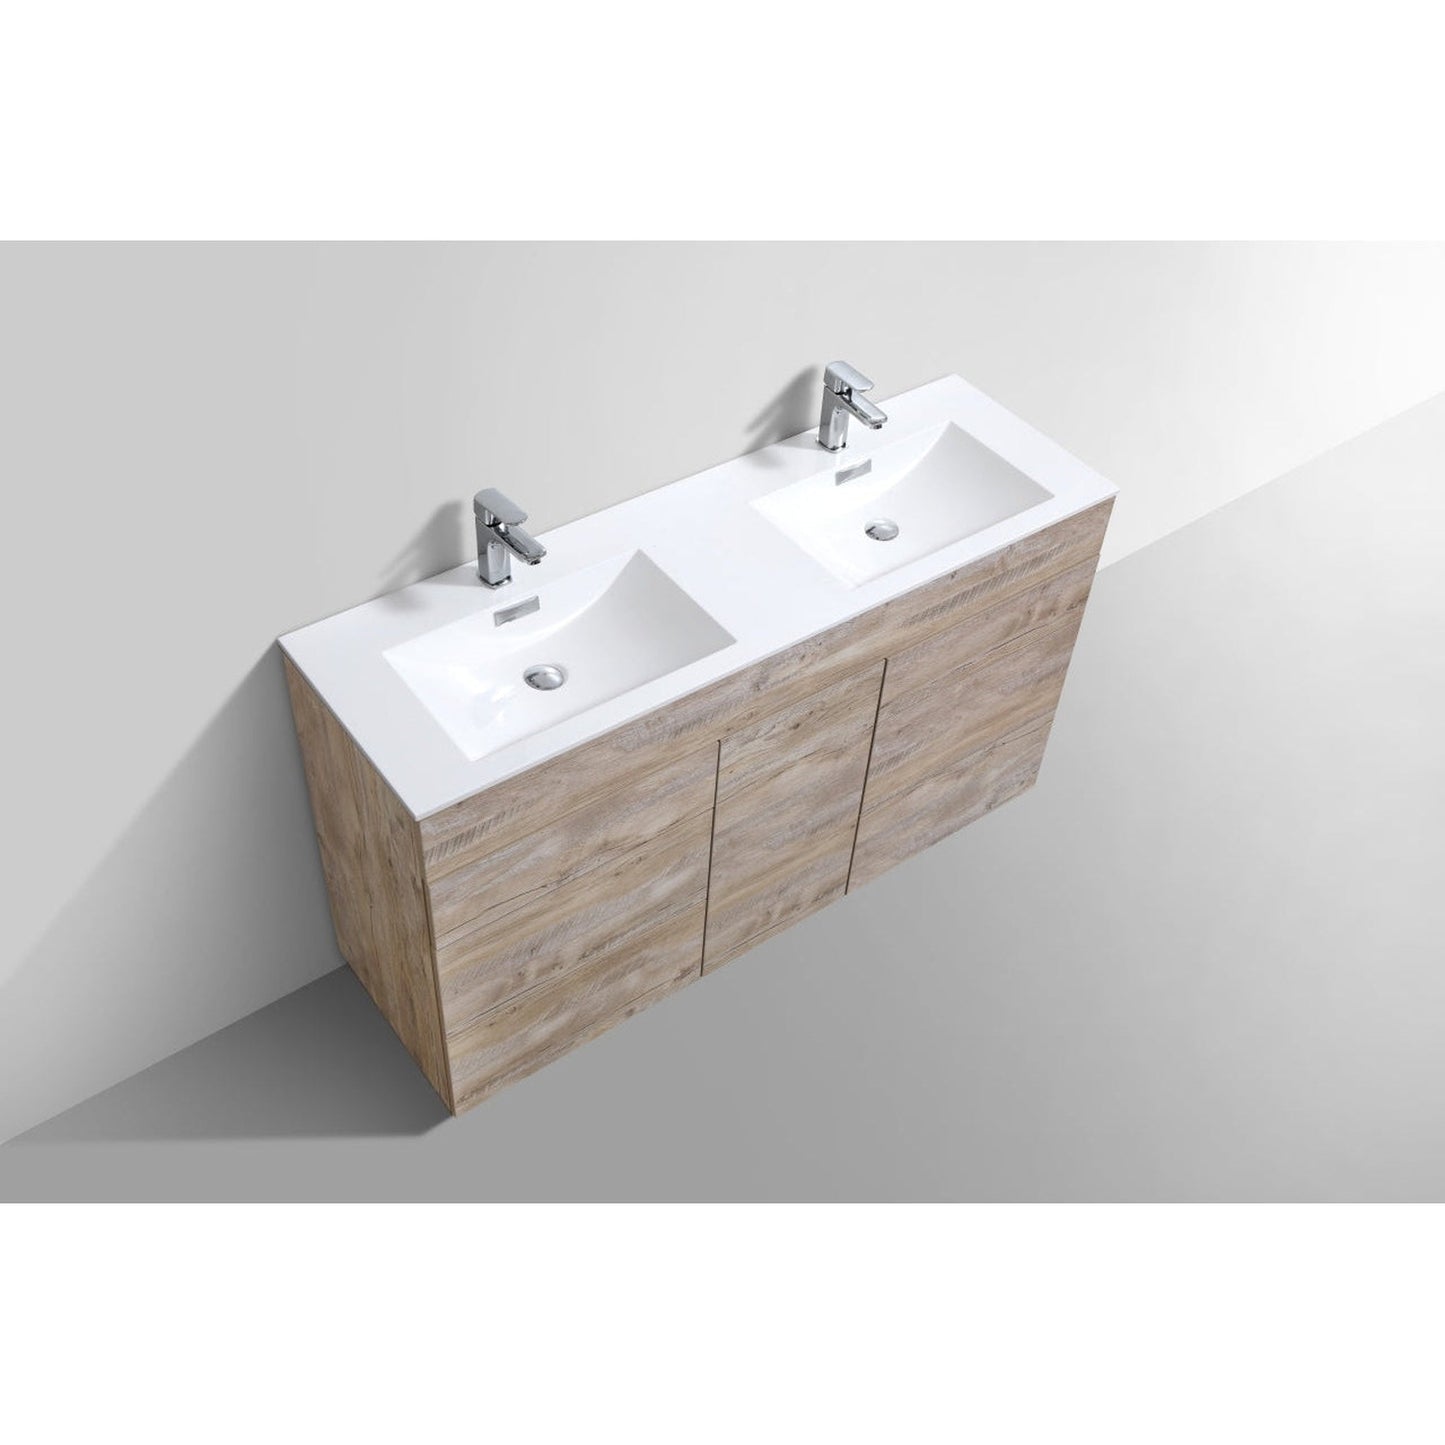 KubeBath Milano 60" Nature Wood Freestanding Modern Bathroom Vanity With Double Integrated Acrylic Sink With Overflow and 60" Wood Framed Mirror With Shelf